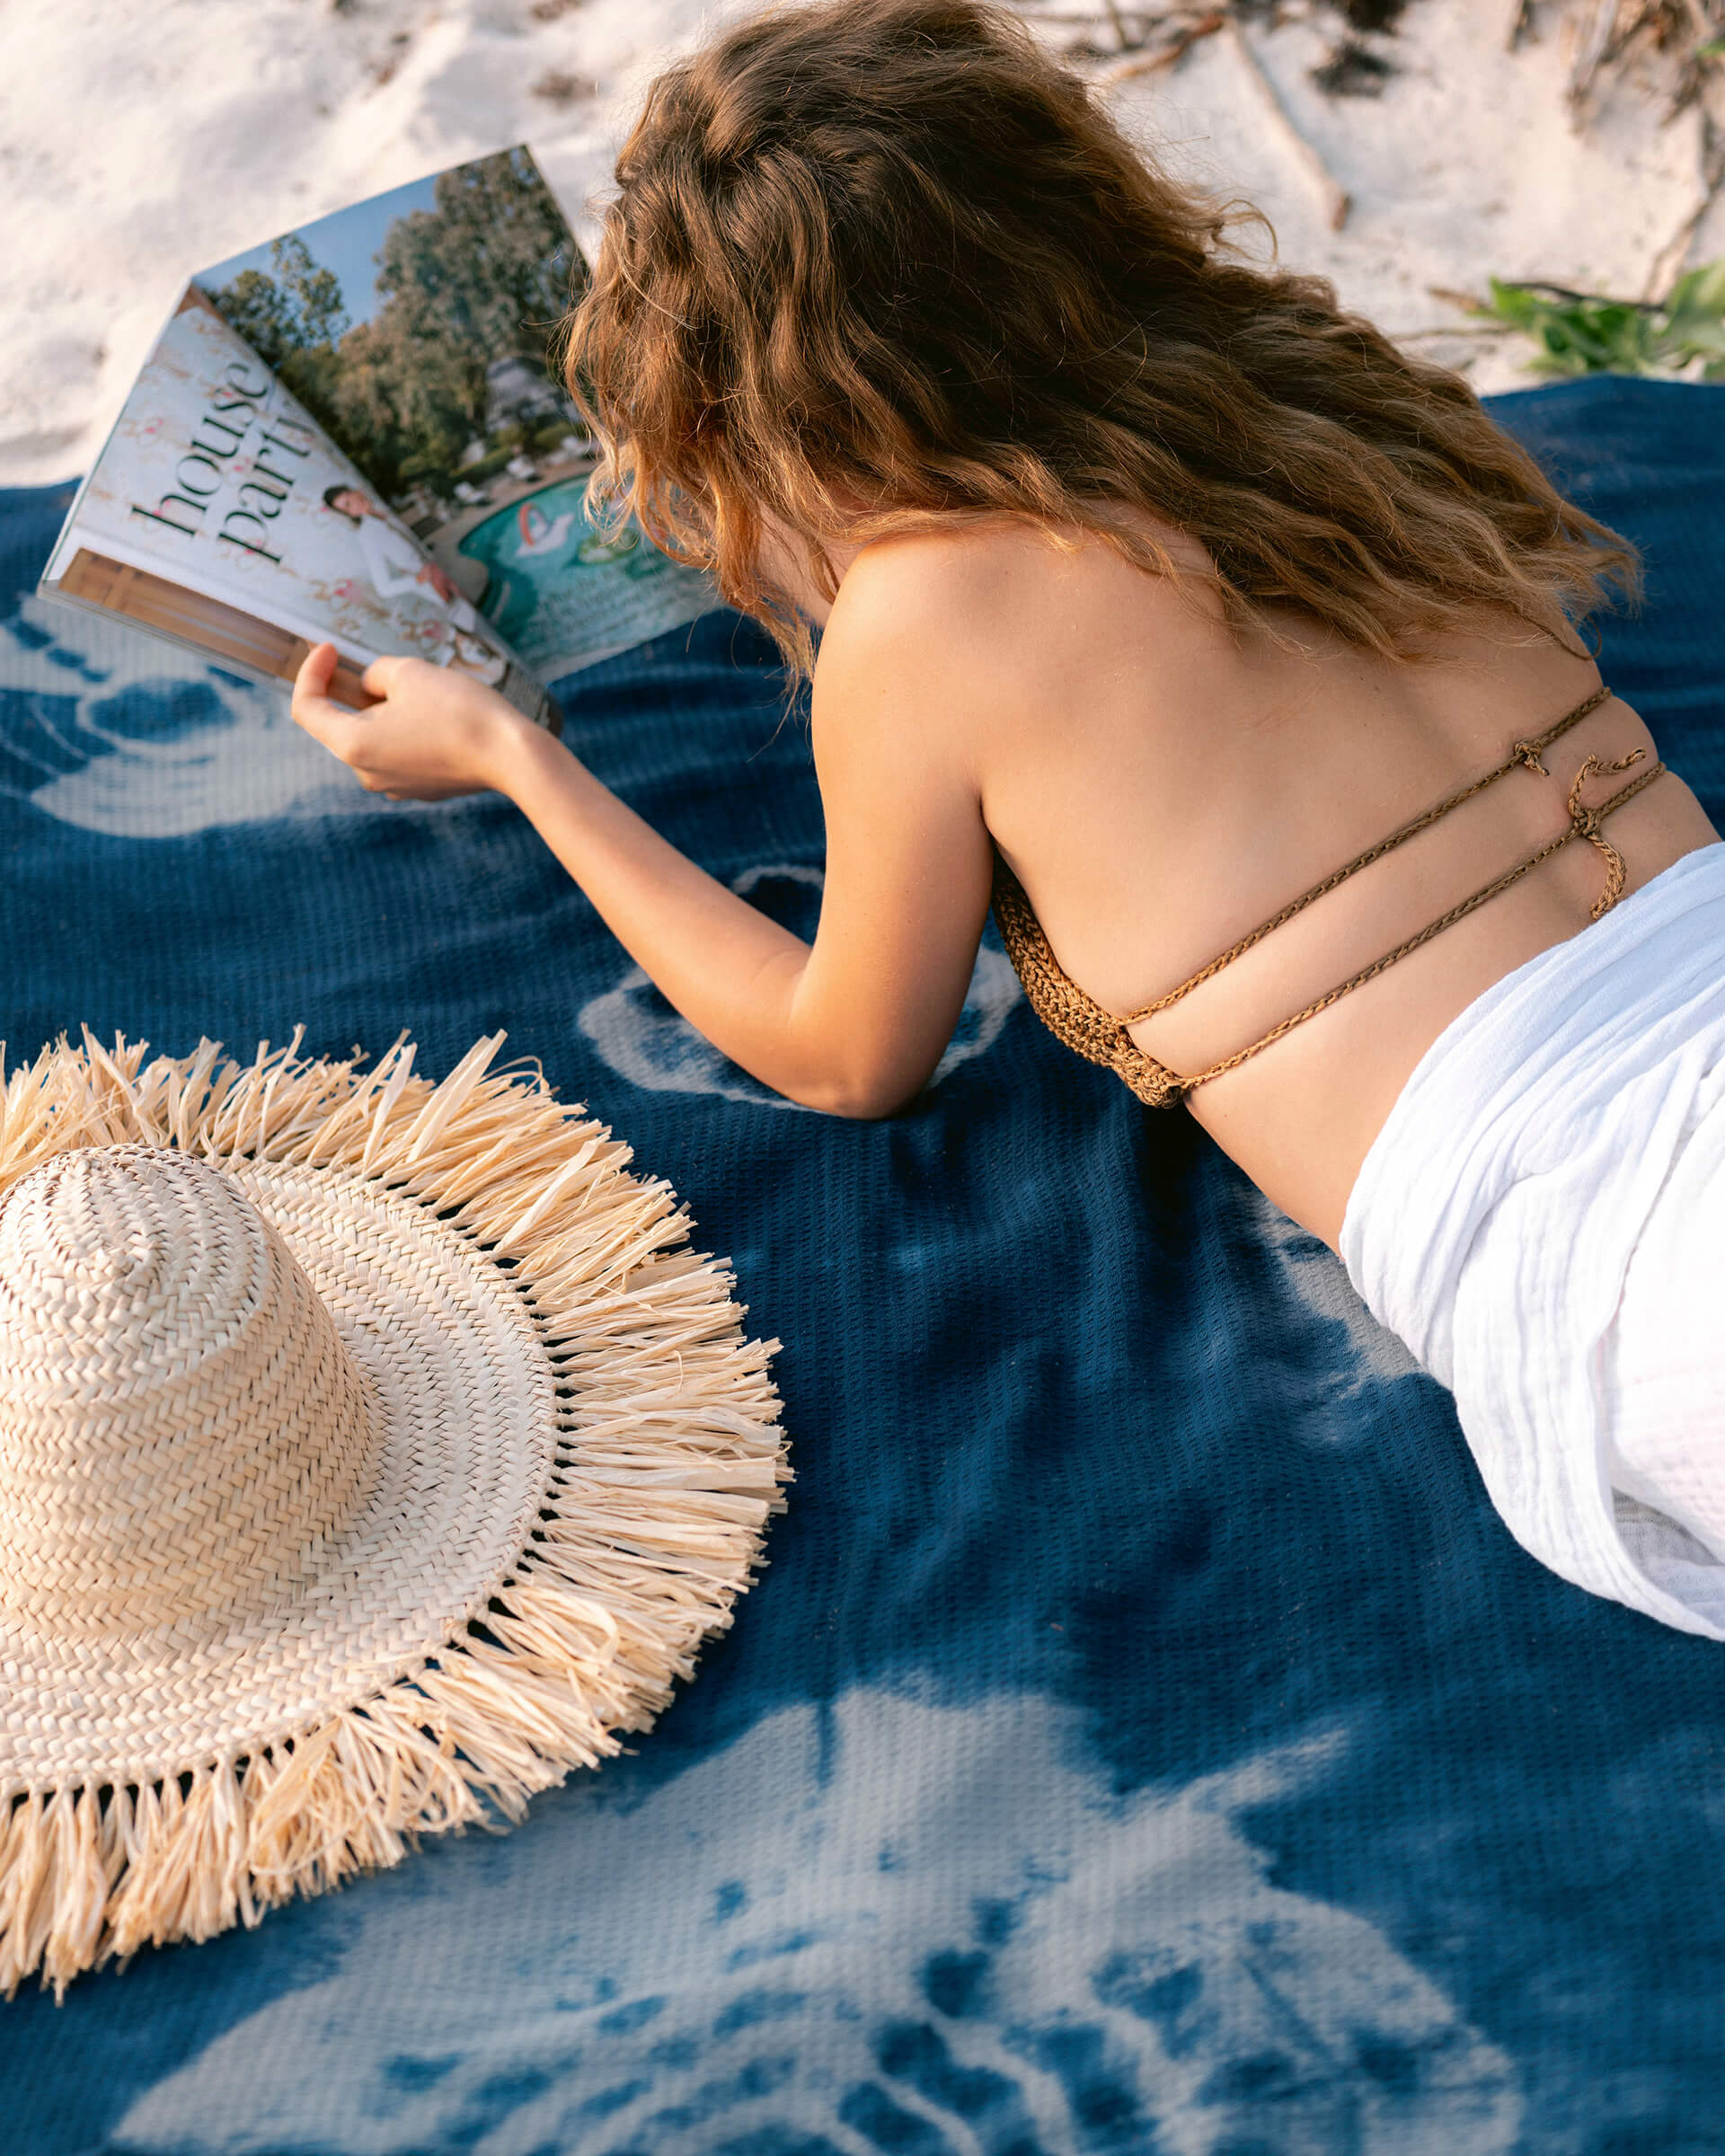 Summer House Blanket in Indigo Shiboriafemale laying on blue shibori blanket reading a magazine with a straw hat next to her on the beach